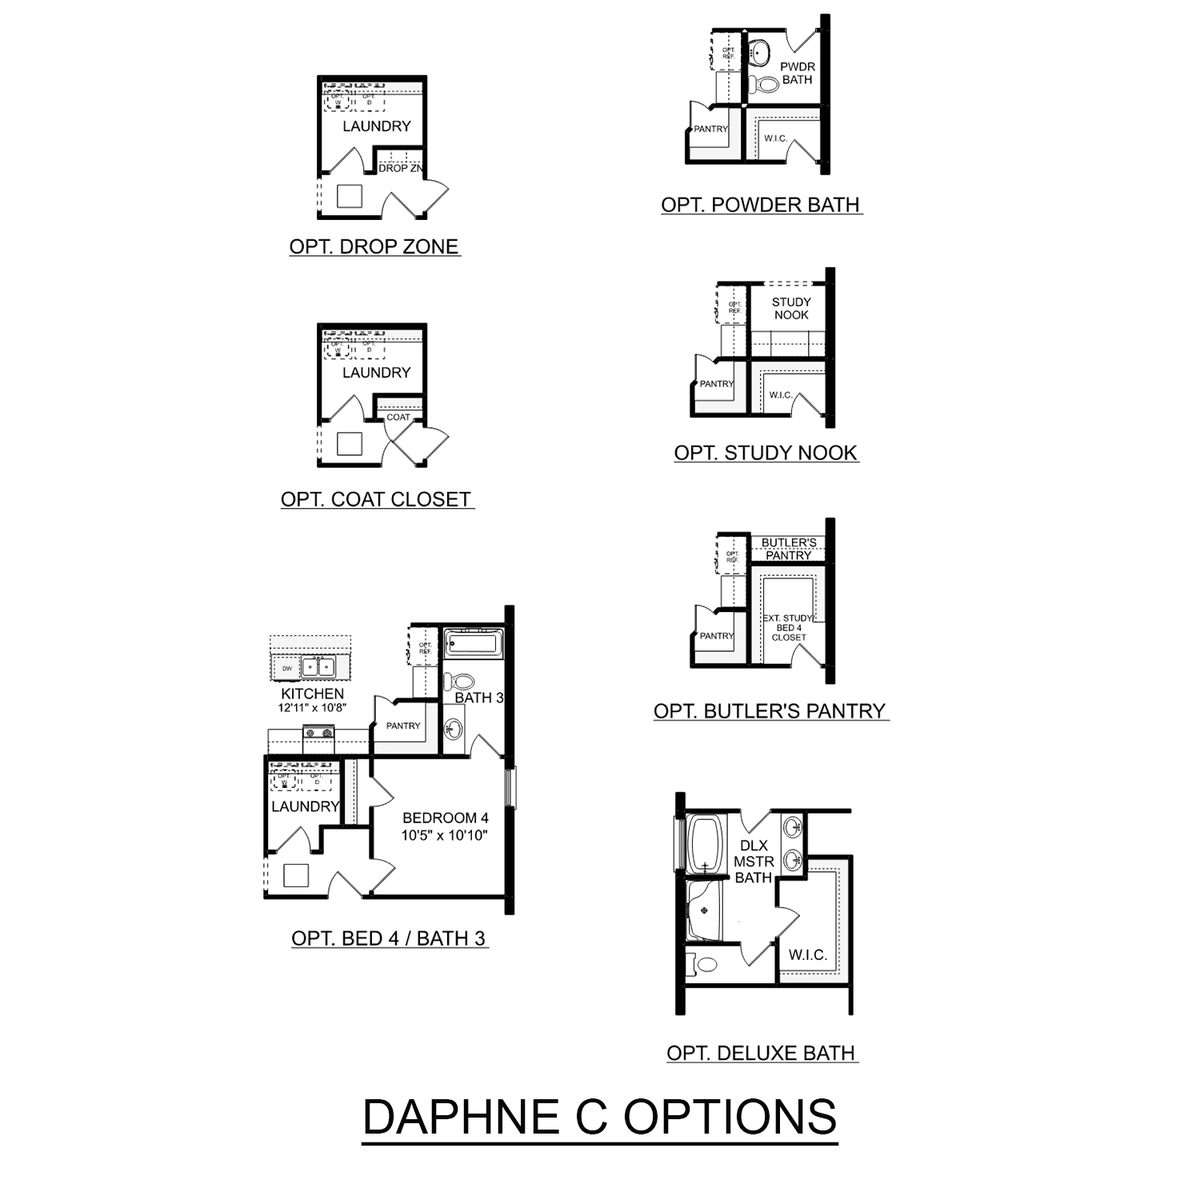 2 - The Daphne C buildable floor plan layout in Davidson Homes' Creekside community.